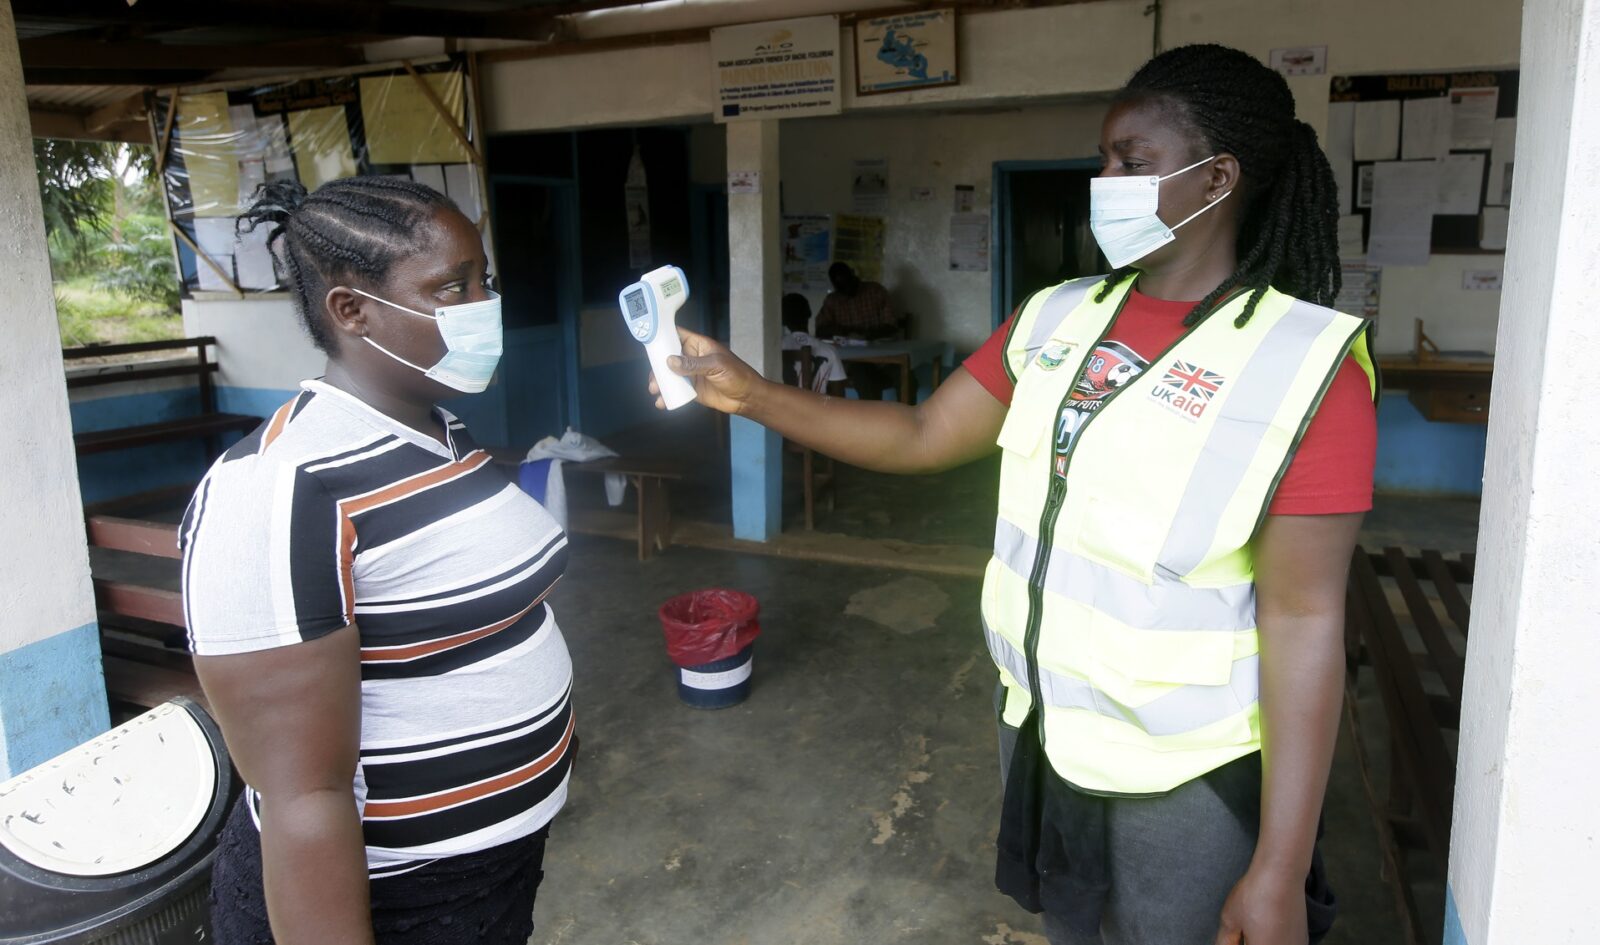 A woman wearing a high-visibility jacket checks the temperature of another woman. Both are wearing masks.